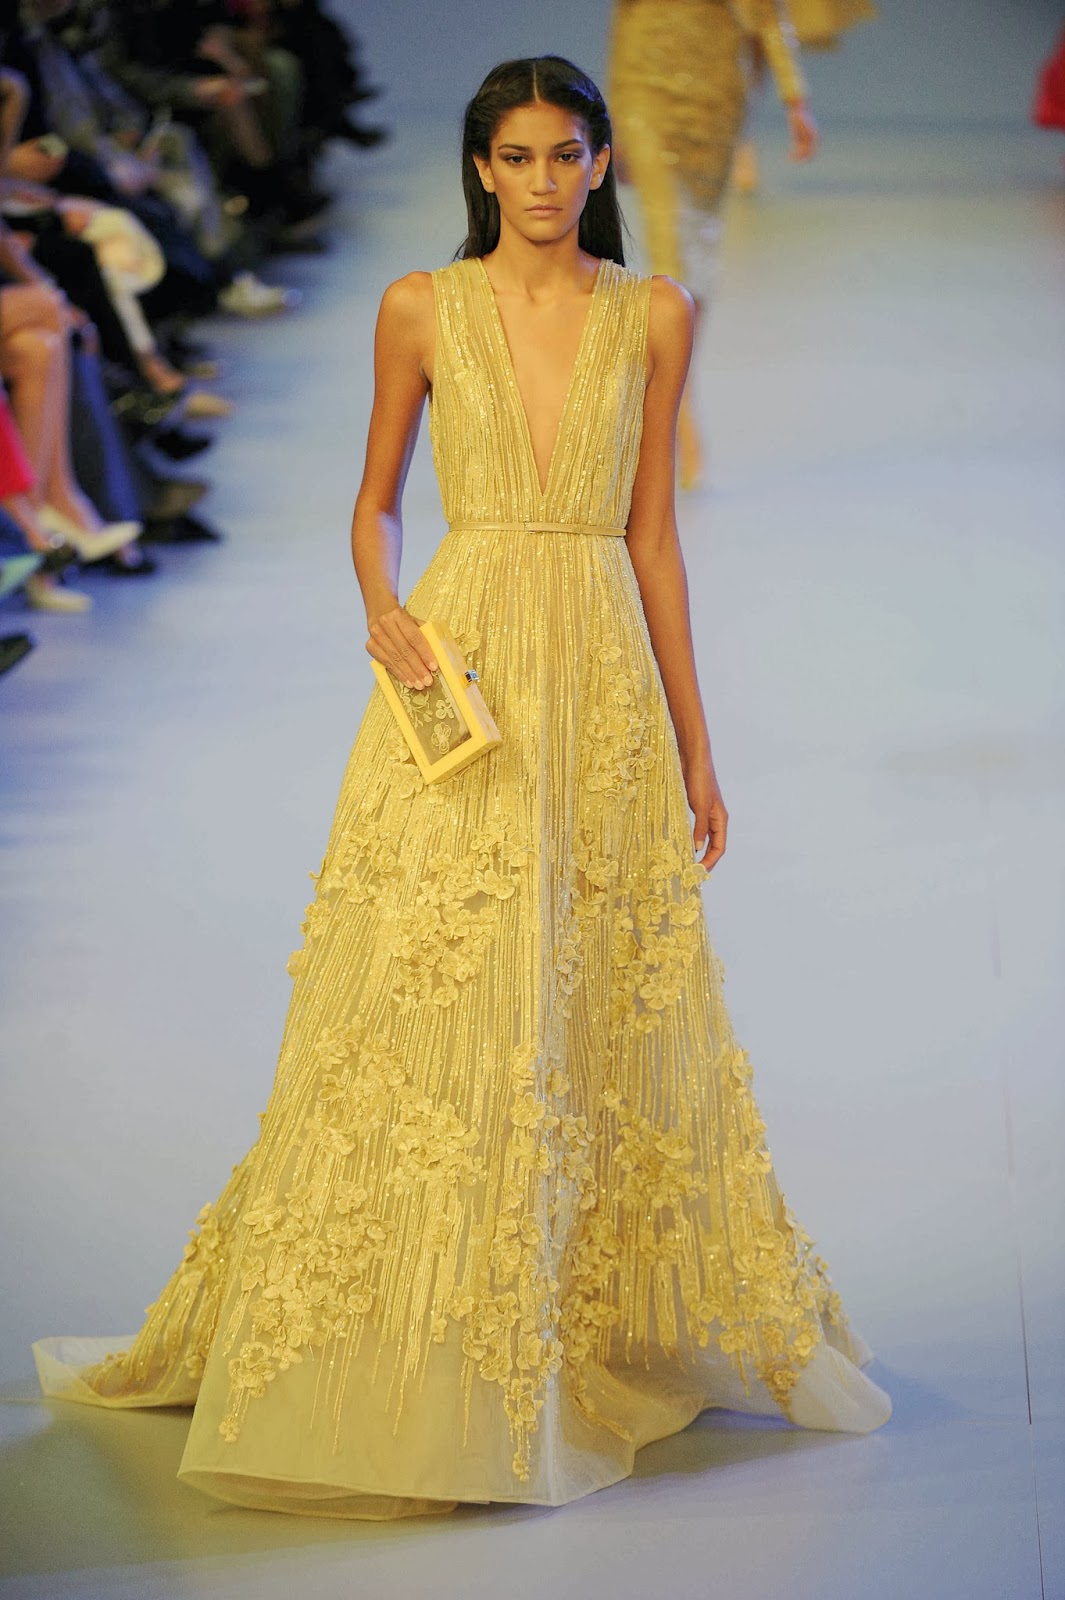 AMORE (Beauty + Fashion): WEDDING BELL WEDNESDAY - ELIE SAAB SS14 COUTURE